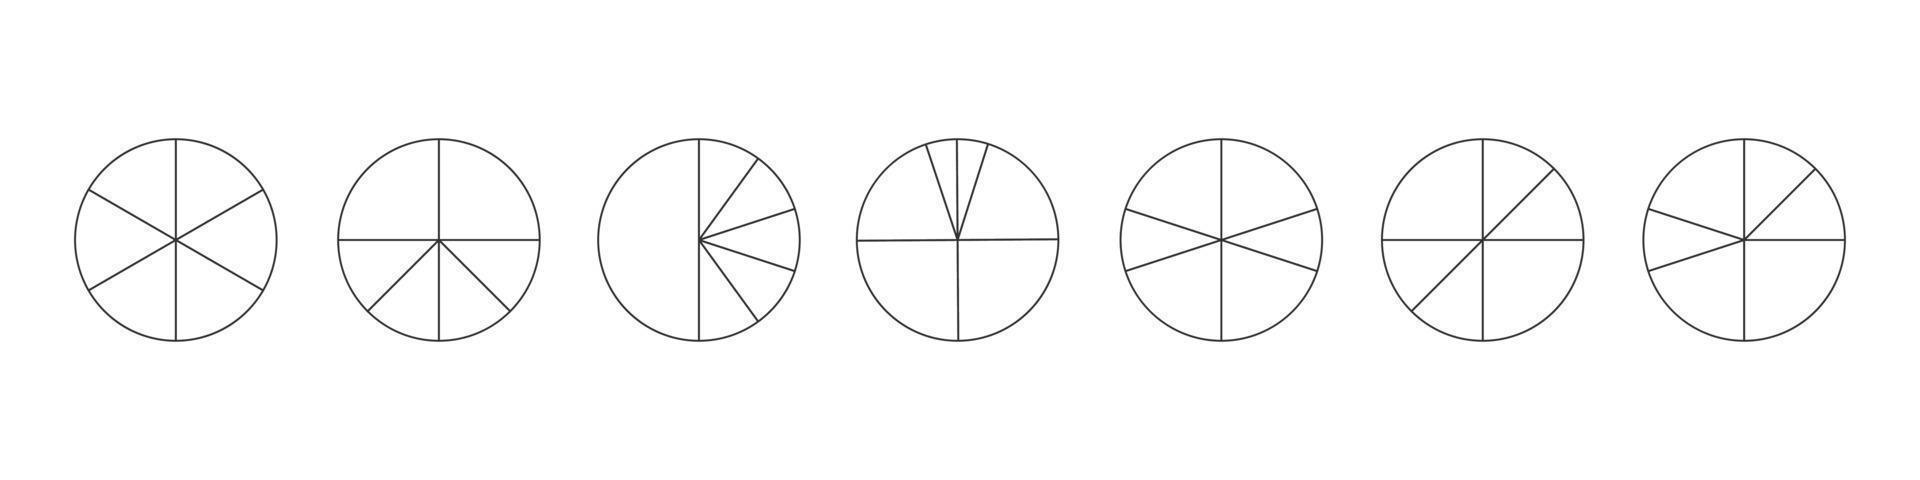 Outline circles separated in 6 segments isolated on white background. Pie or pizza round shapes cut in different six slices. Simple statistical infographic examples vector